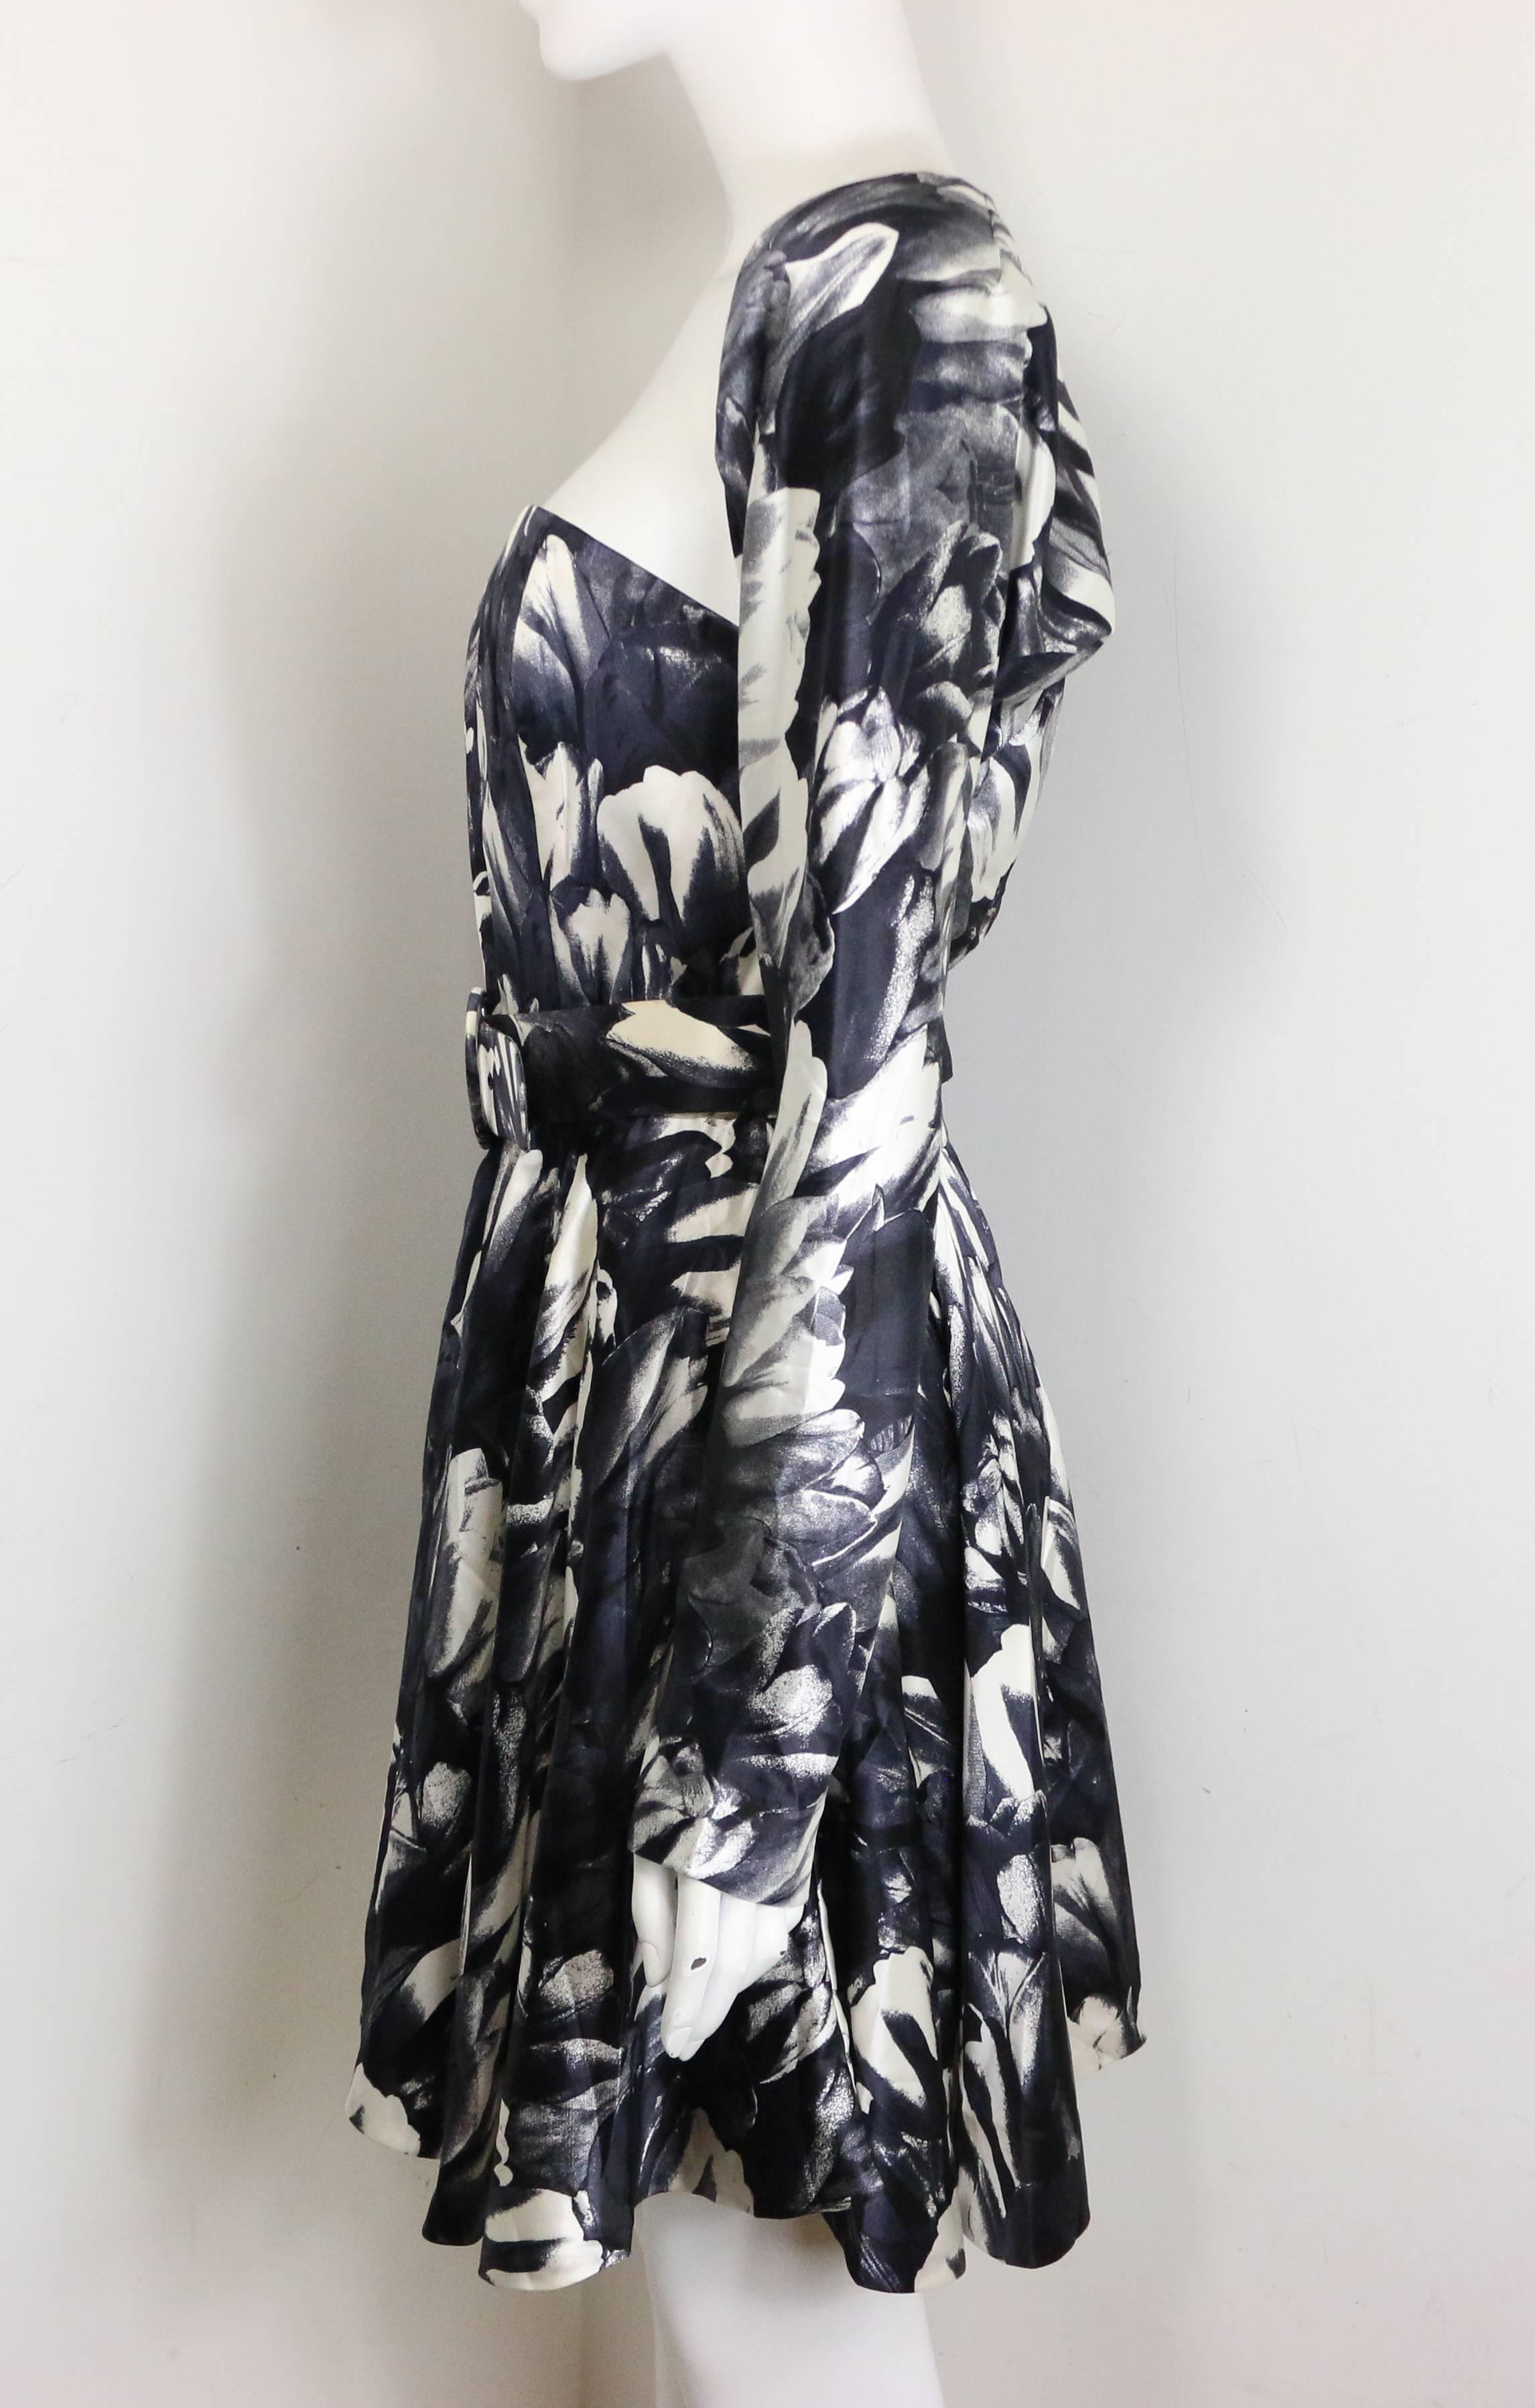 Women's David Fielden Black and White Floral Print Tube Dress with Bolero Shrug Sleeves  For Sale